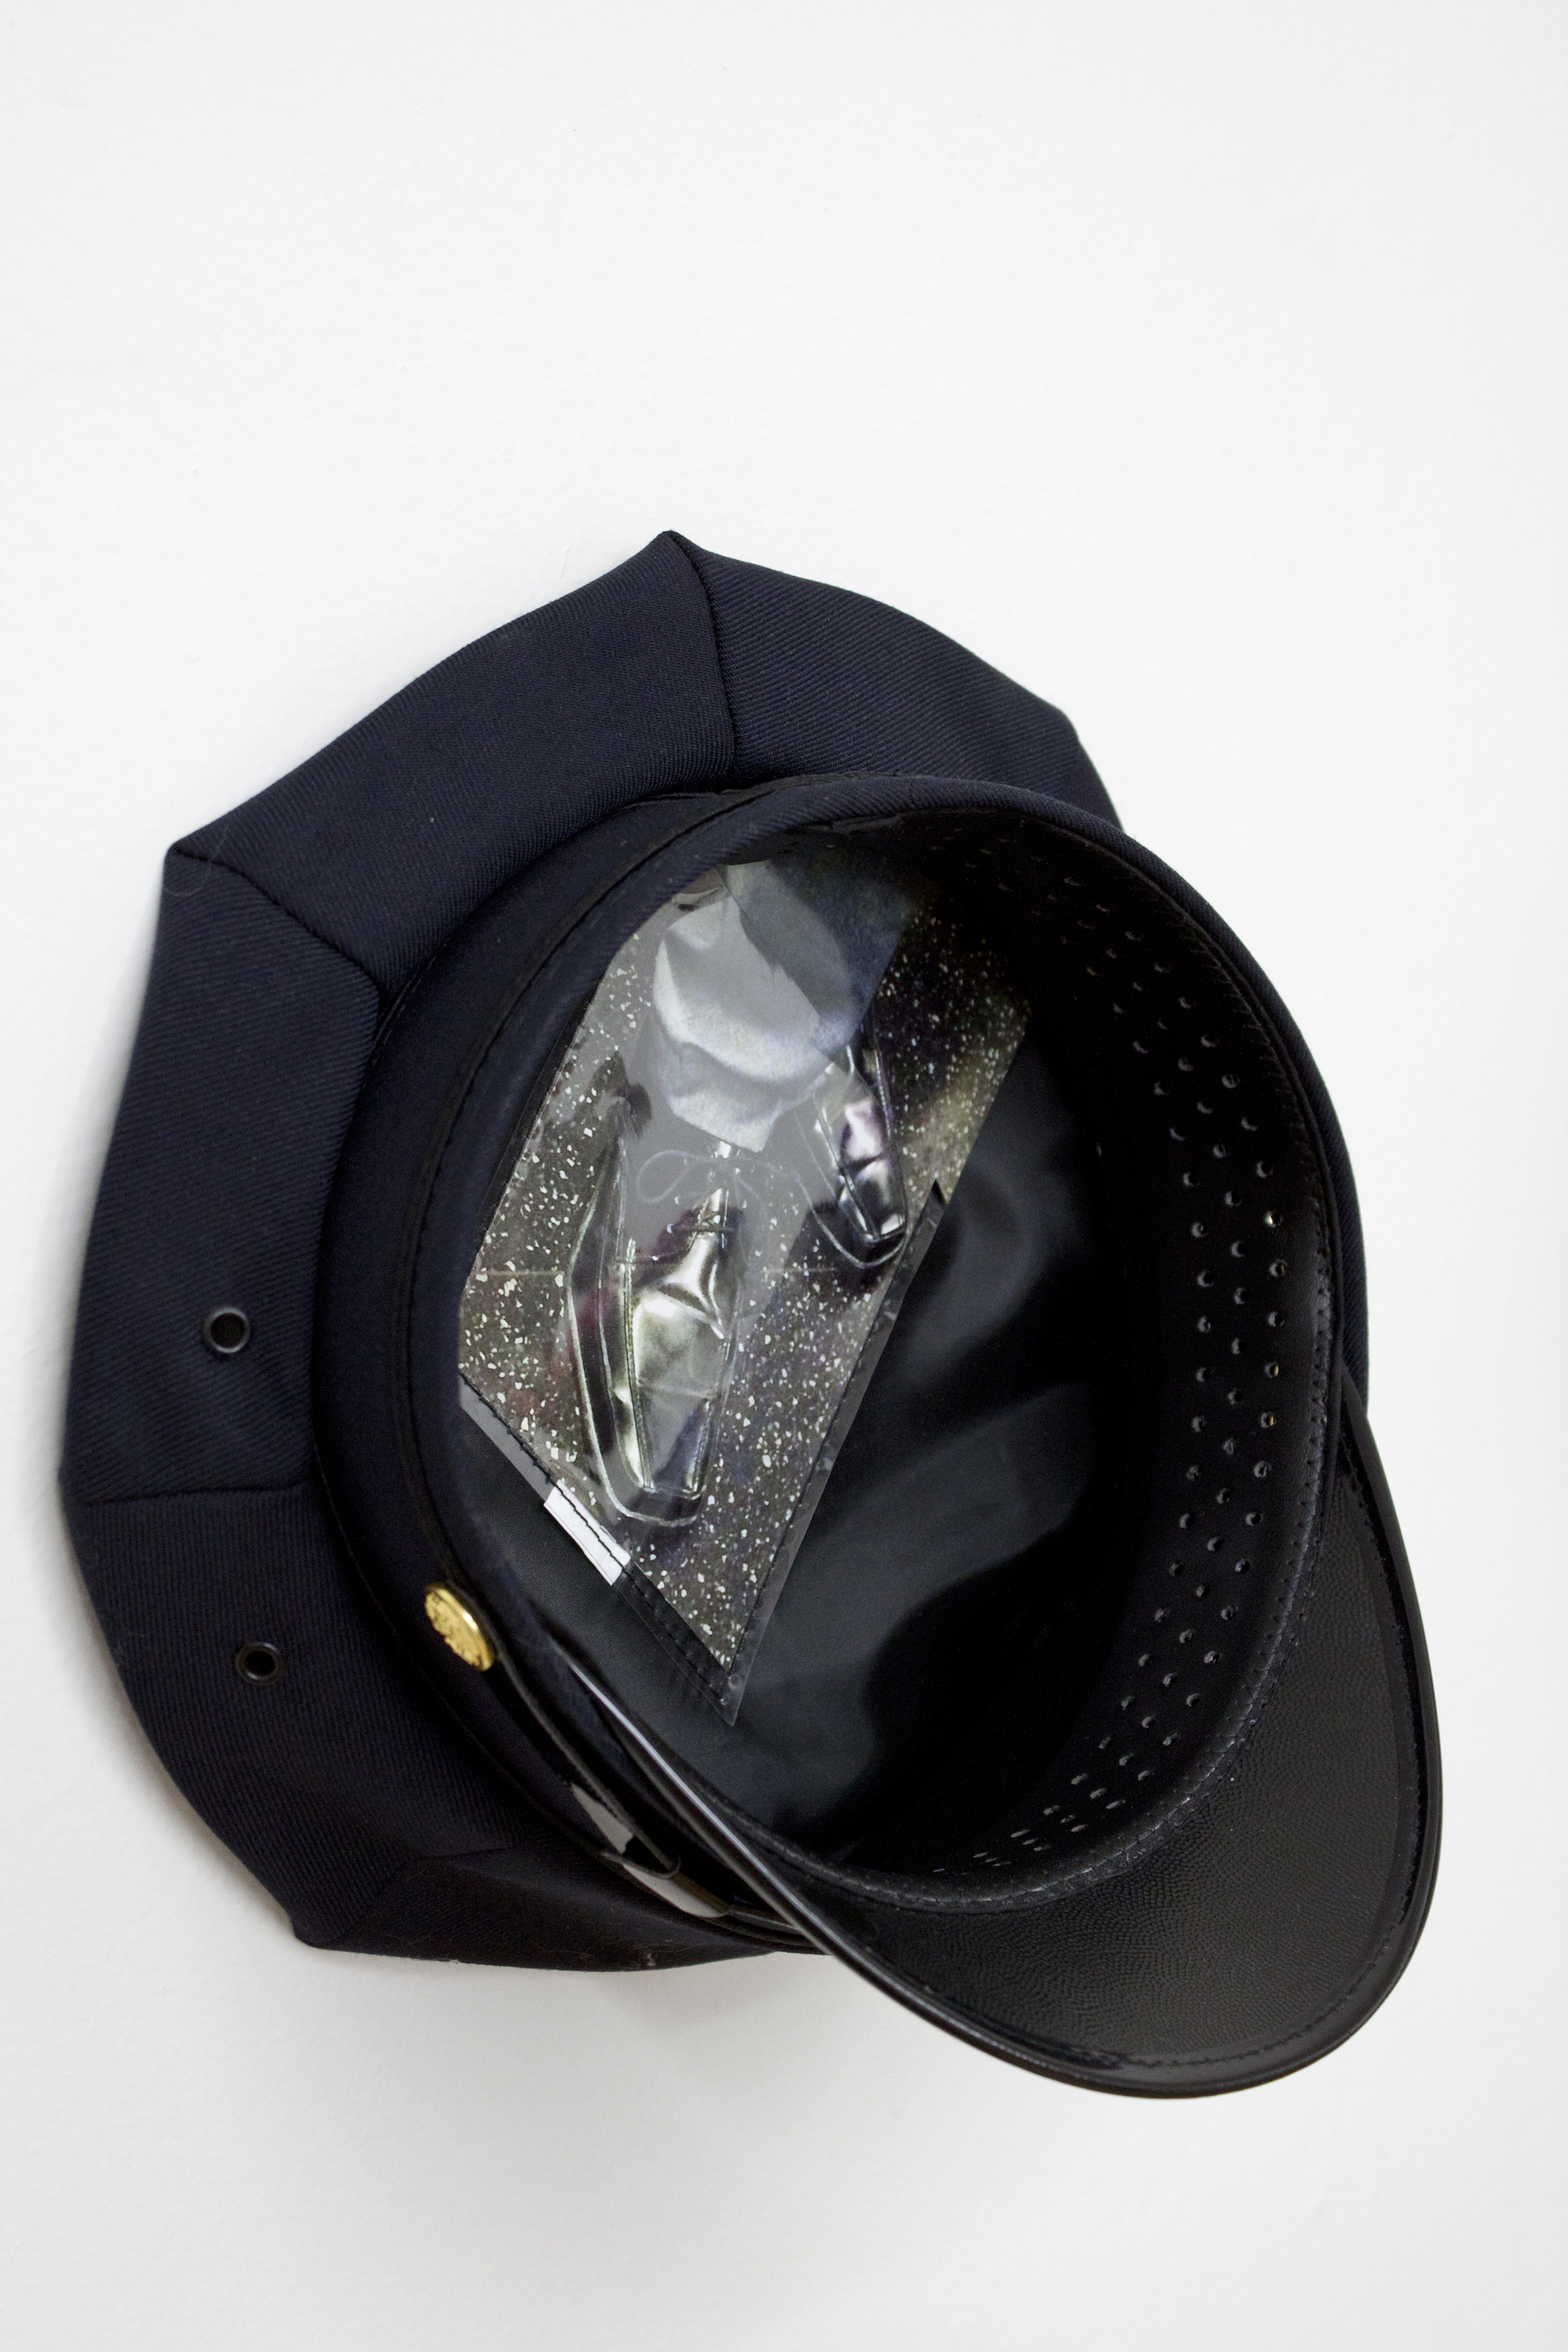 Under Their Hats (box toe 1), 2017 Police issued hat, digital c-print 10 x 10 x 5 1/2 inches / 25.4 x 25.4 x 14 cm